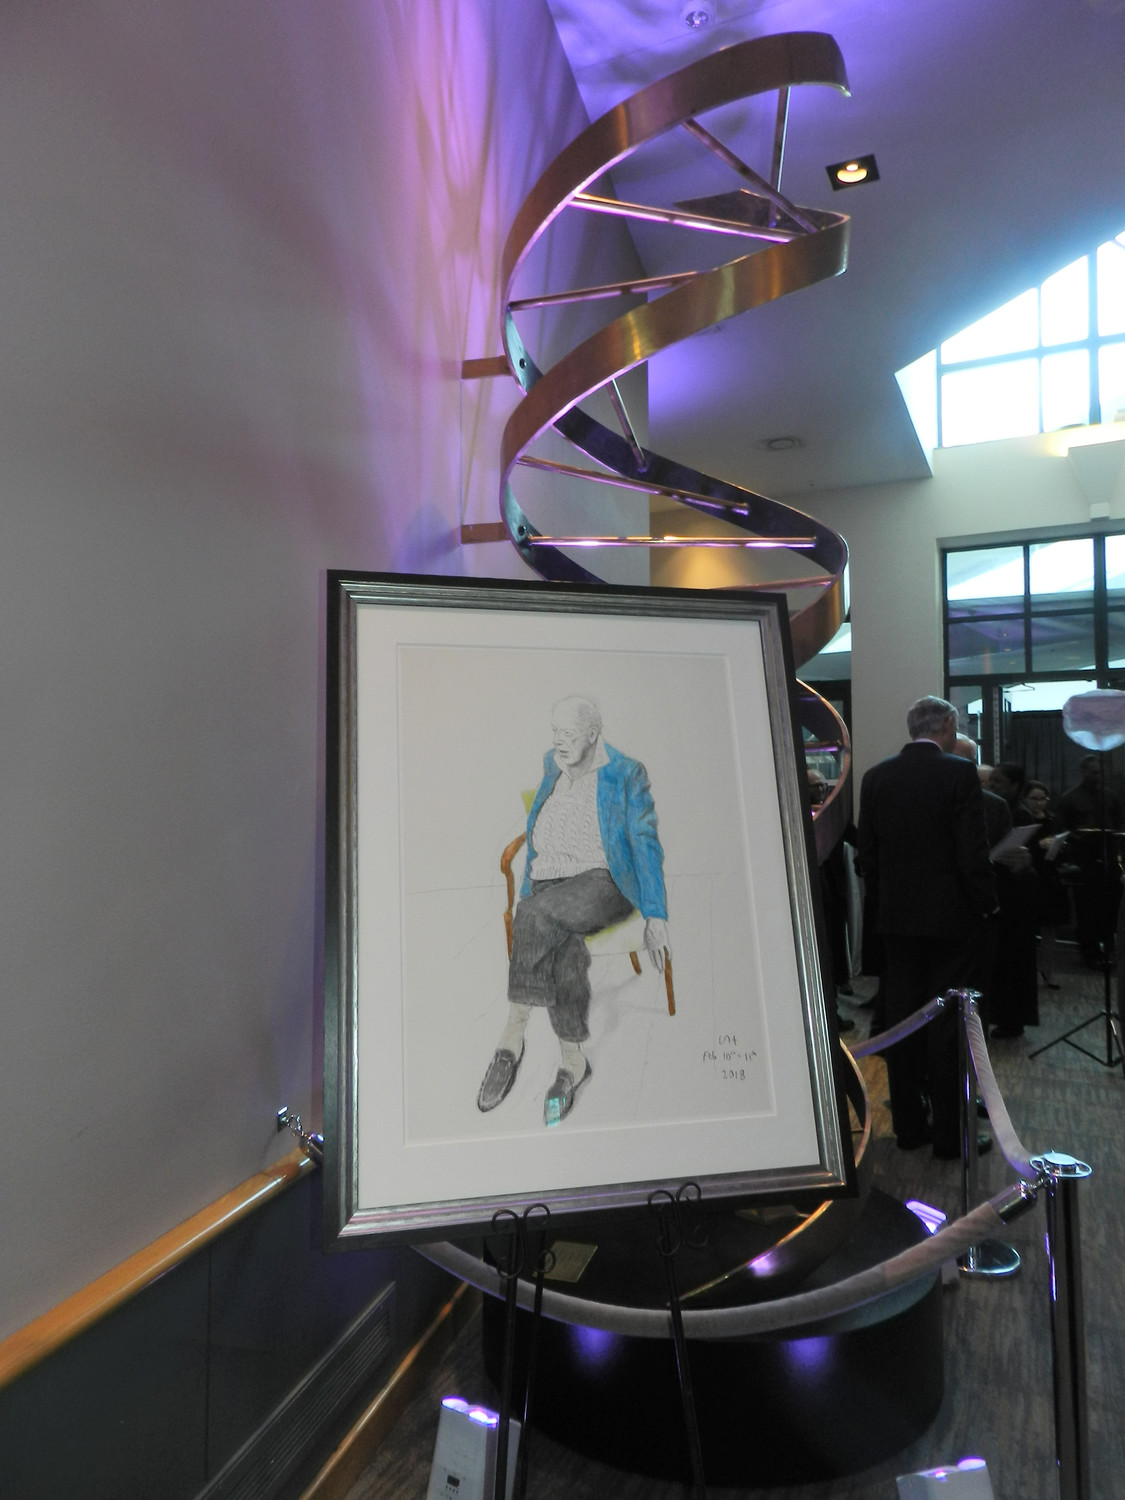 A drawing by David Hockney depicting Dr. Watson, alongside a steel structure of DNA, was displayed in the cocktail area during the party.